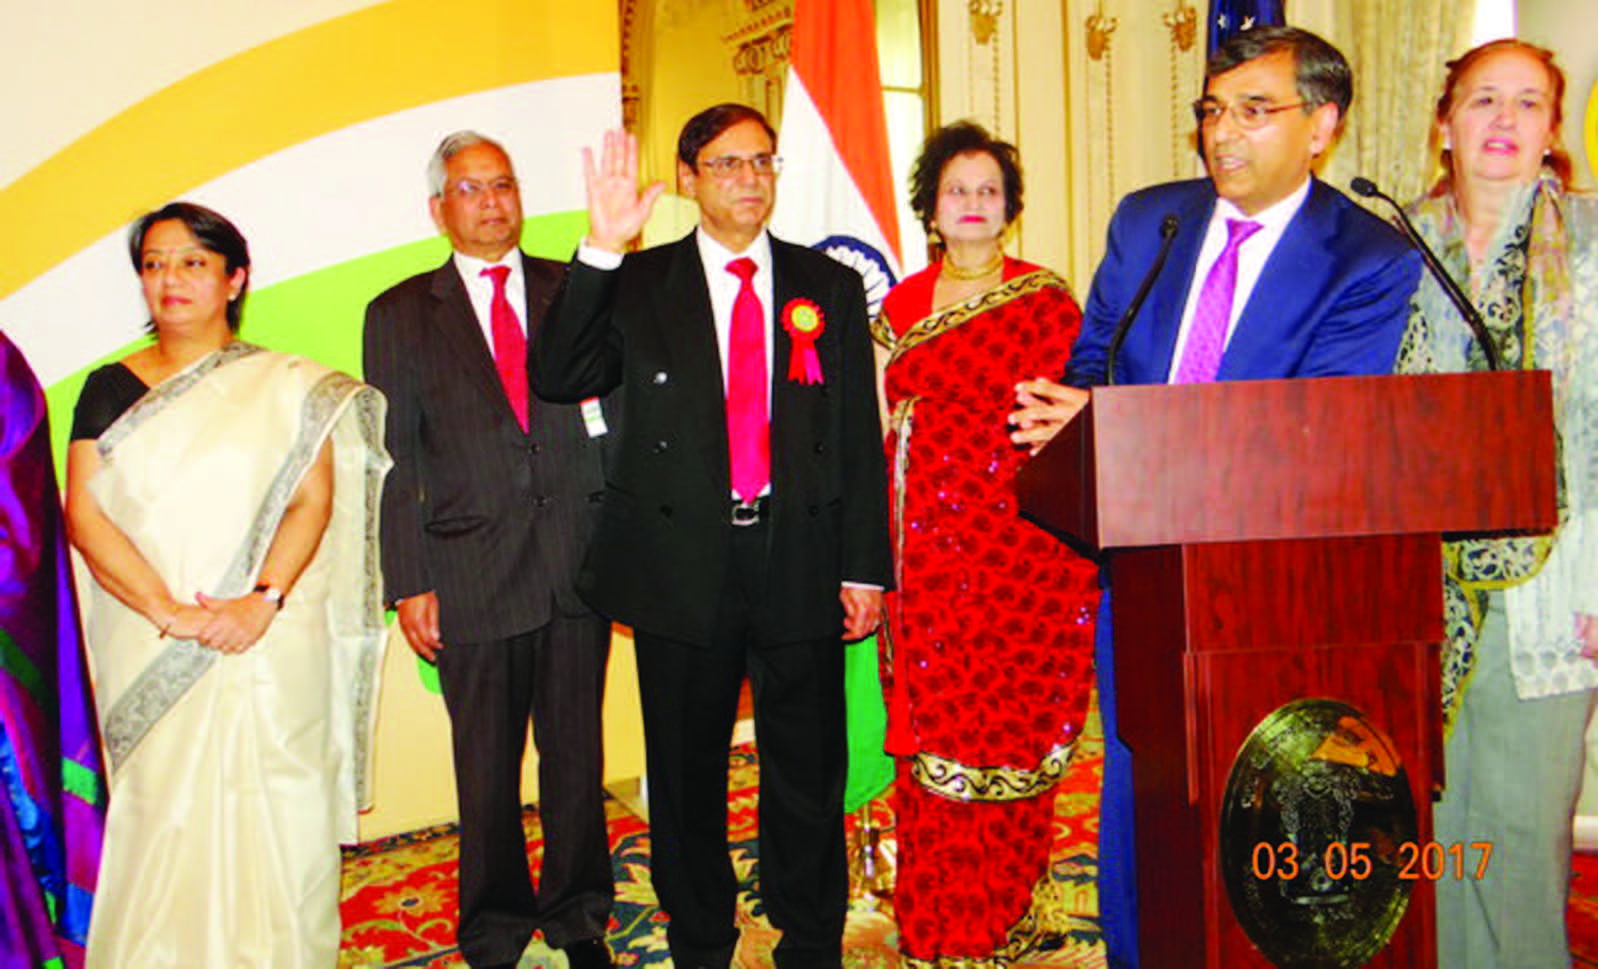 Gobind Munjal (with raised right hand) is sworn in by the immediate Past President Mr Sunil Modi (at the mike). From L to R: Consul General Riva Ganguly Das, Shashi Shah, Gobind Munjal, Mrs. Munjal, Sunil Modi, and Manhattan Borough President Gale Brewer